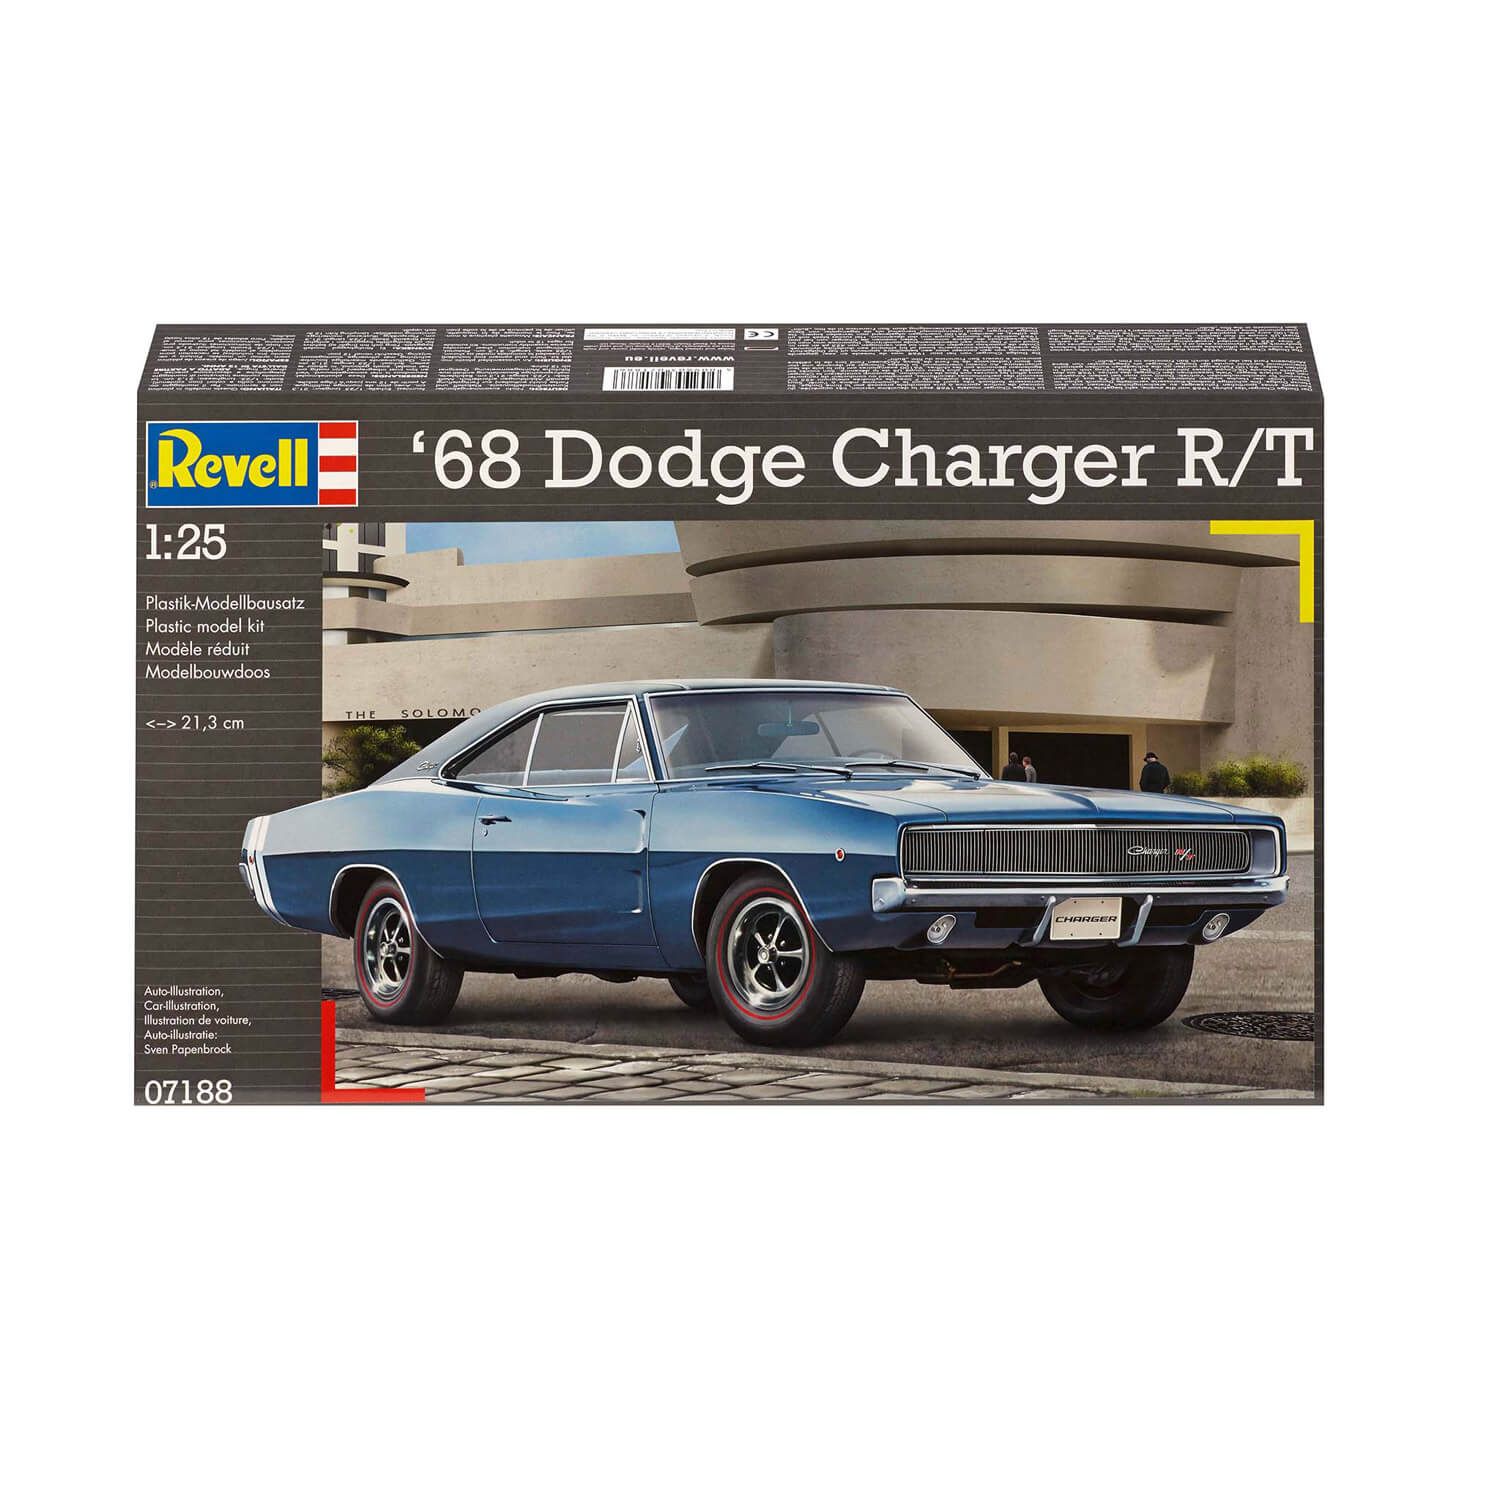 Revell 1968 Dodge Charger R/T (07188) - B-Toys Keerbergen